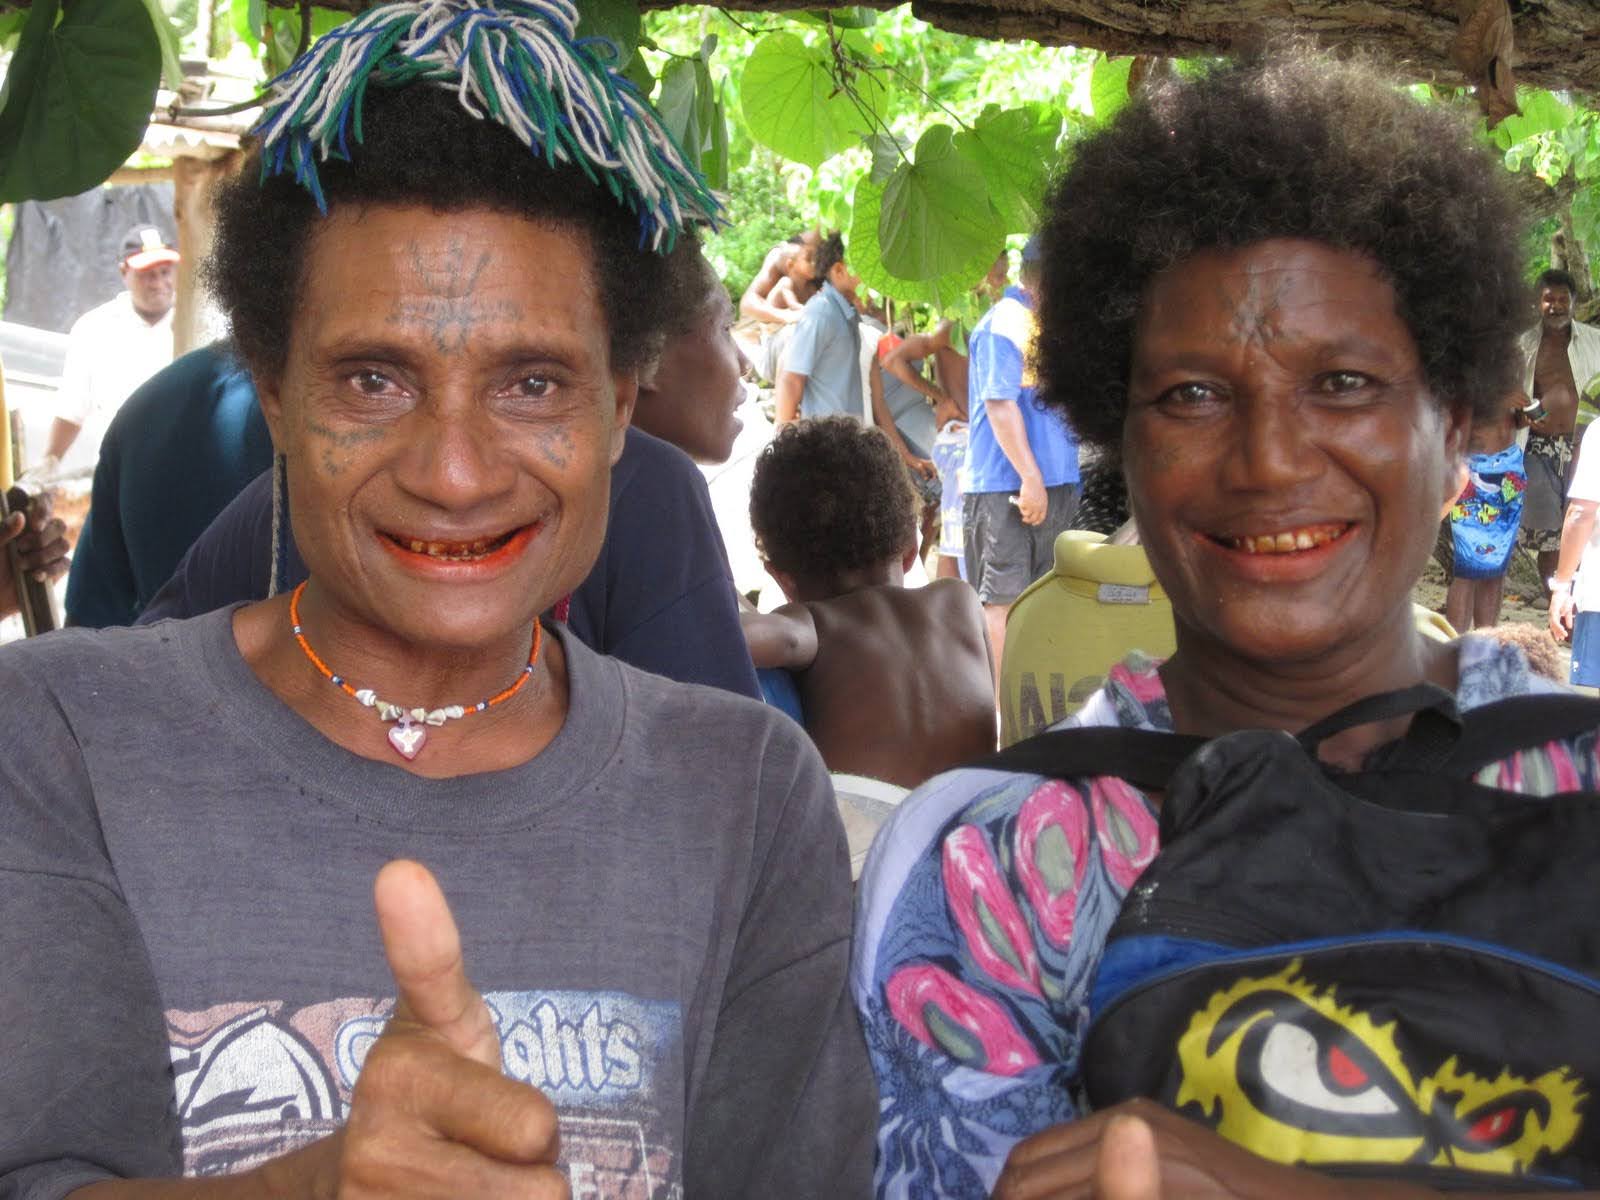 Women coming to see the glider work, Ponam Island, Papua New Guinea